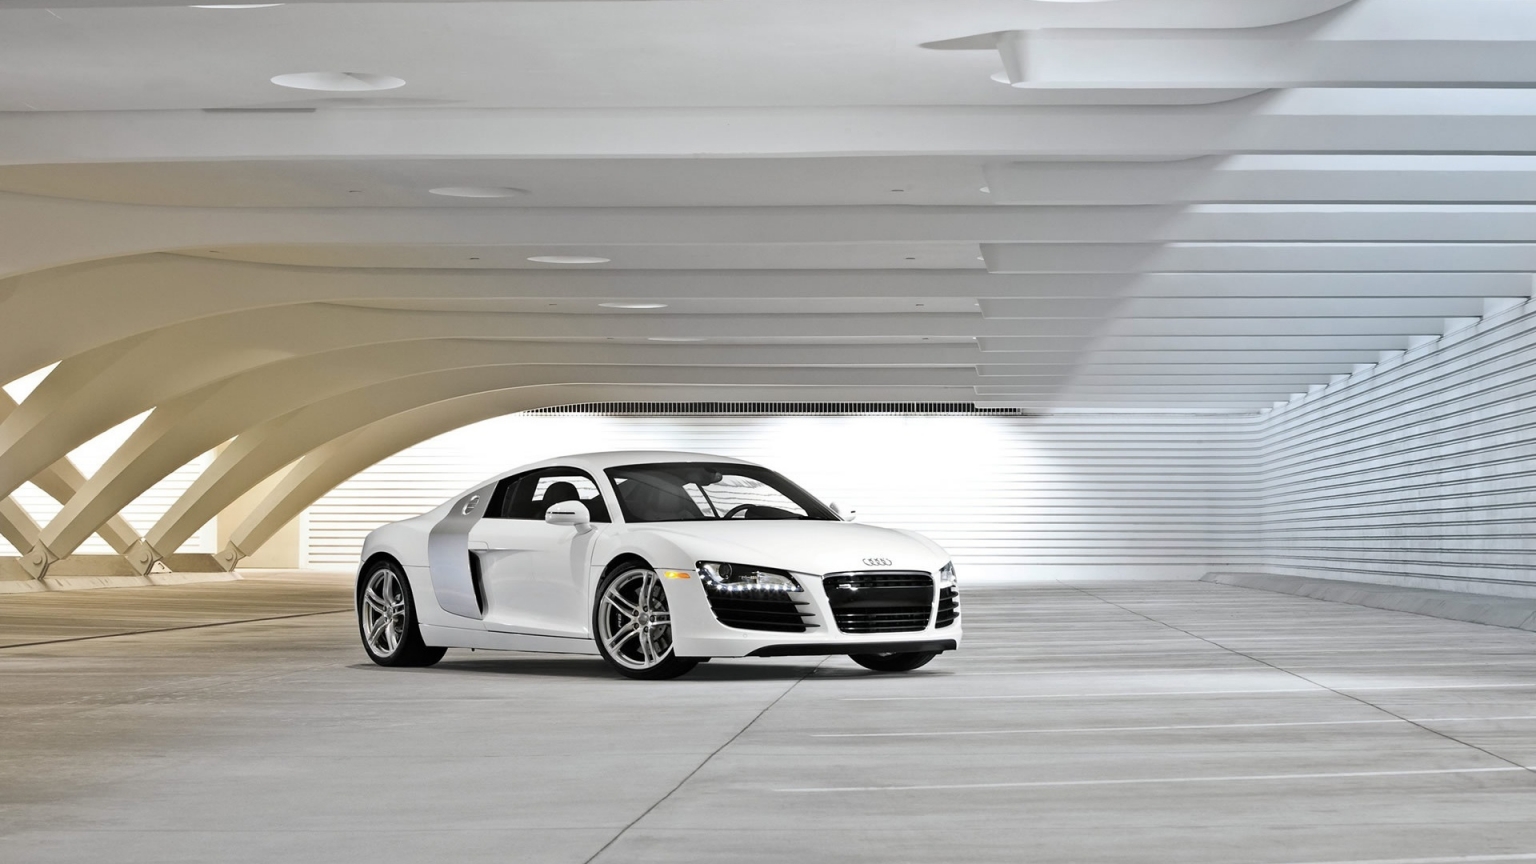 Audi R8 White front and side for 1536 x 864 HDTV resolution